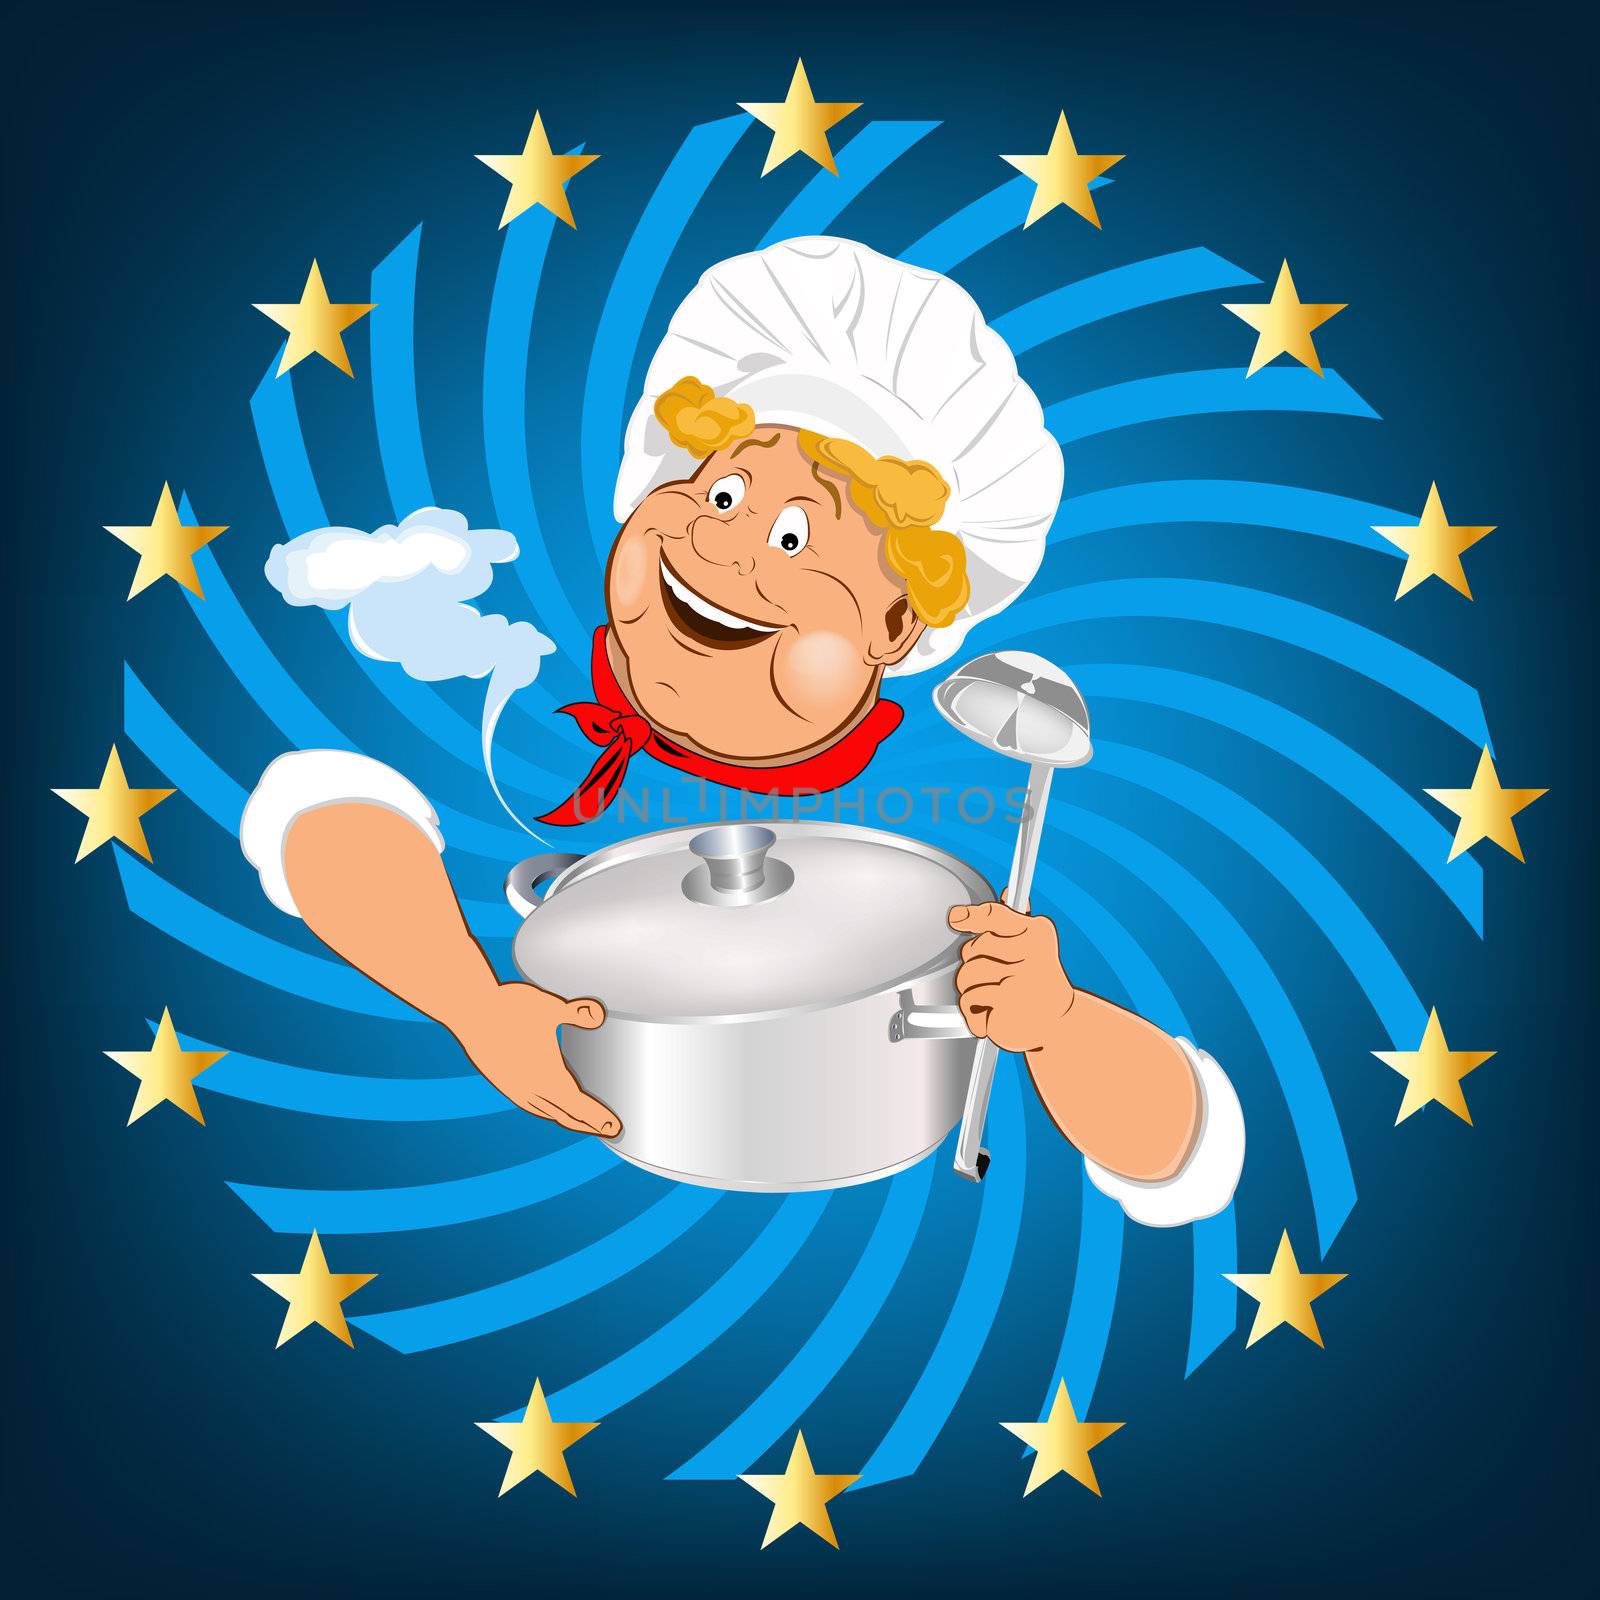 Funny Chef and big saucepan with spoon.Emblem healthy food